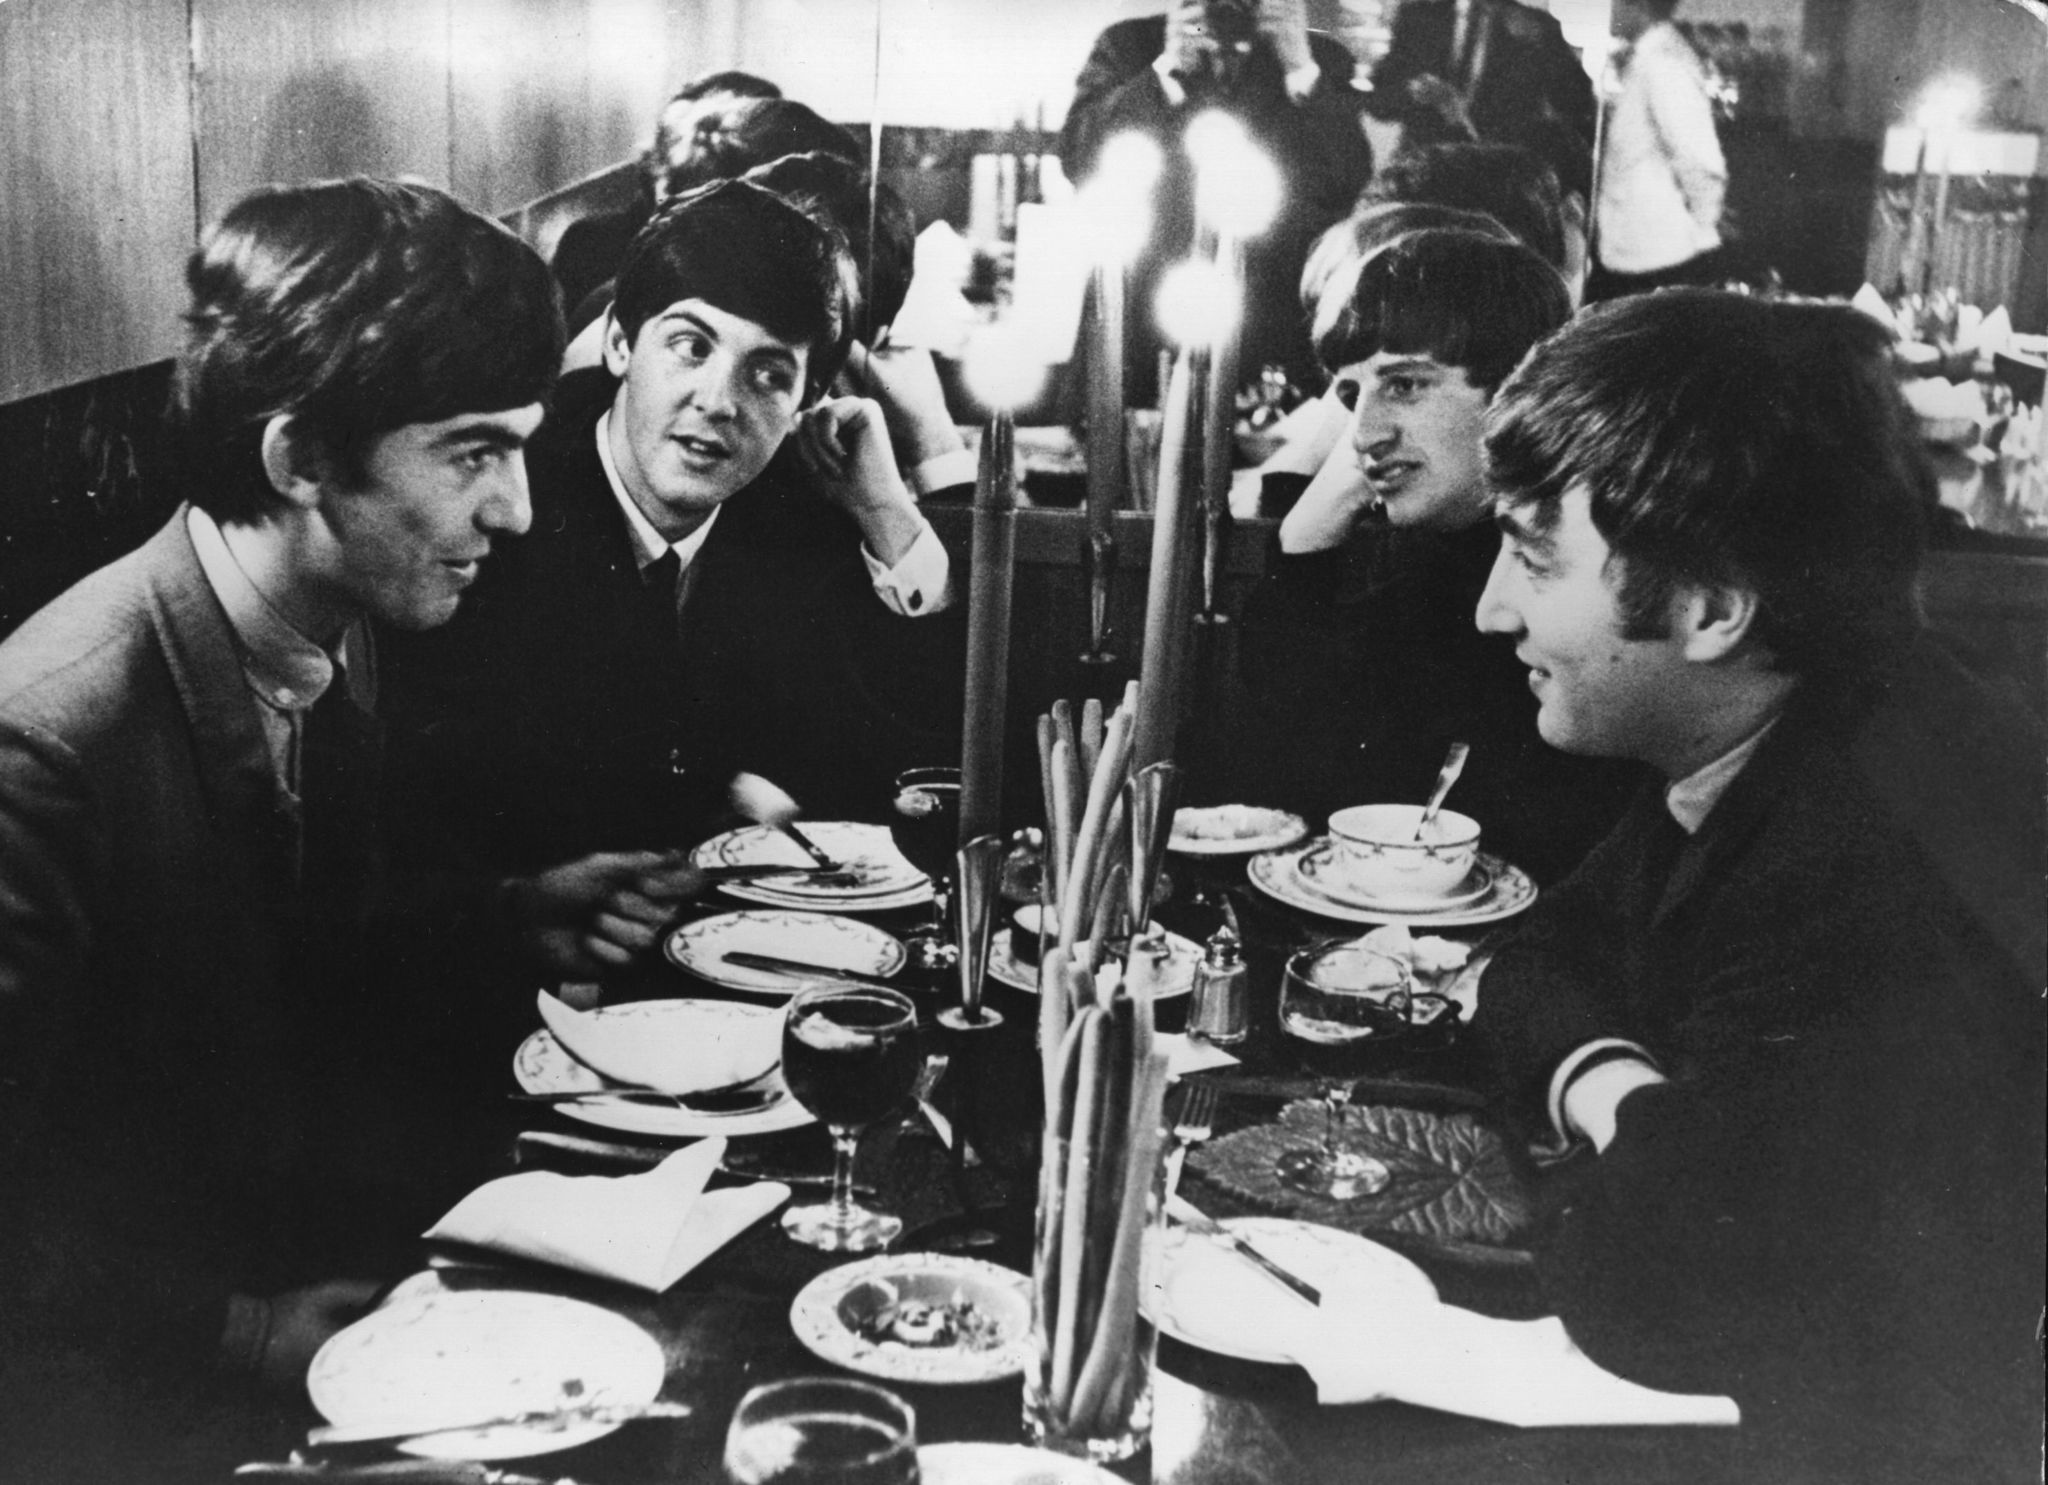 The Beatles meet for the first time after their holidays by candlelight at the Star Steak House in Shaftsbury Avenue, London on Oct. 5, 1963. That night, they appeared on the British music television program 